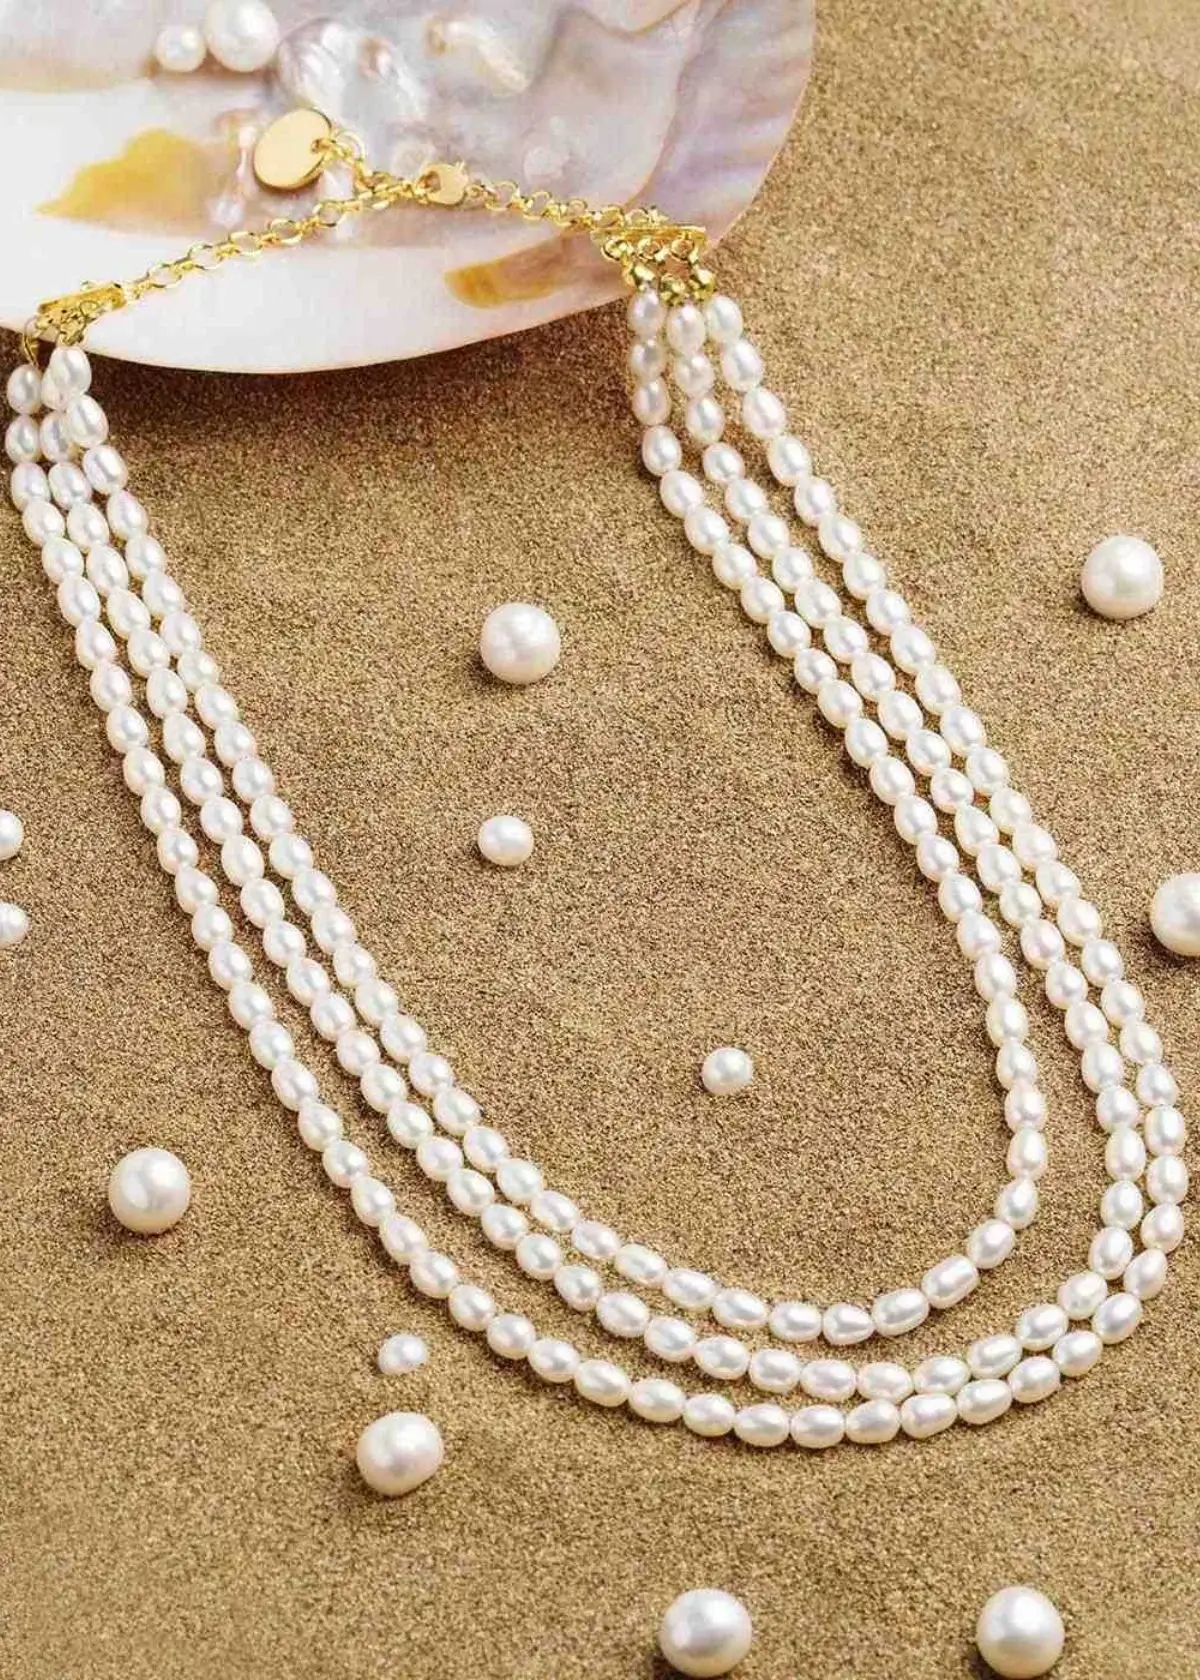 How to Choose the Right Rice Pearl Necklace?